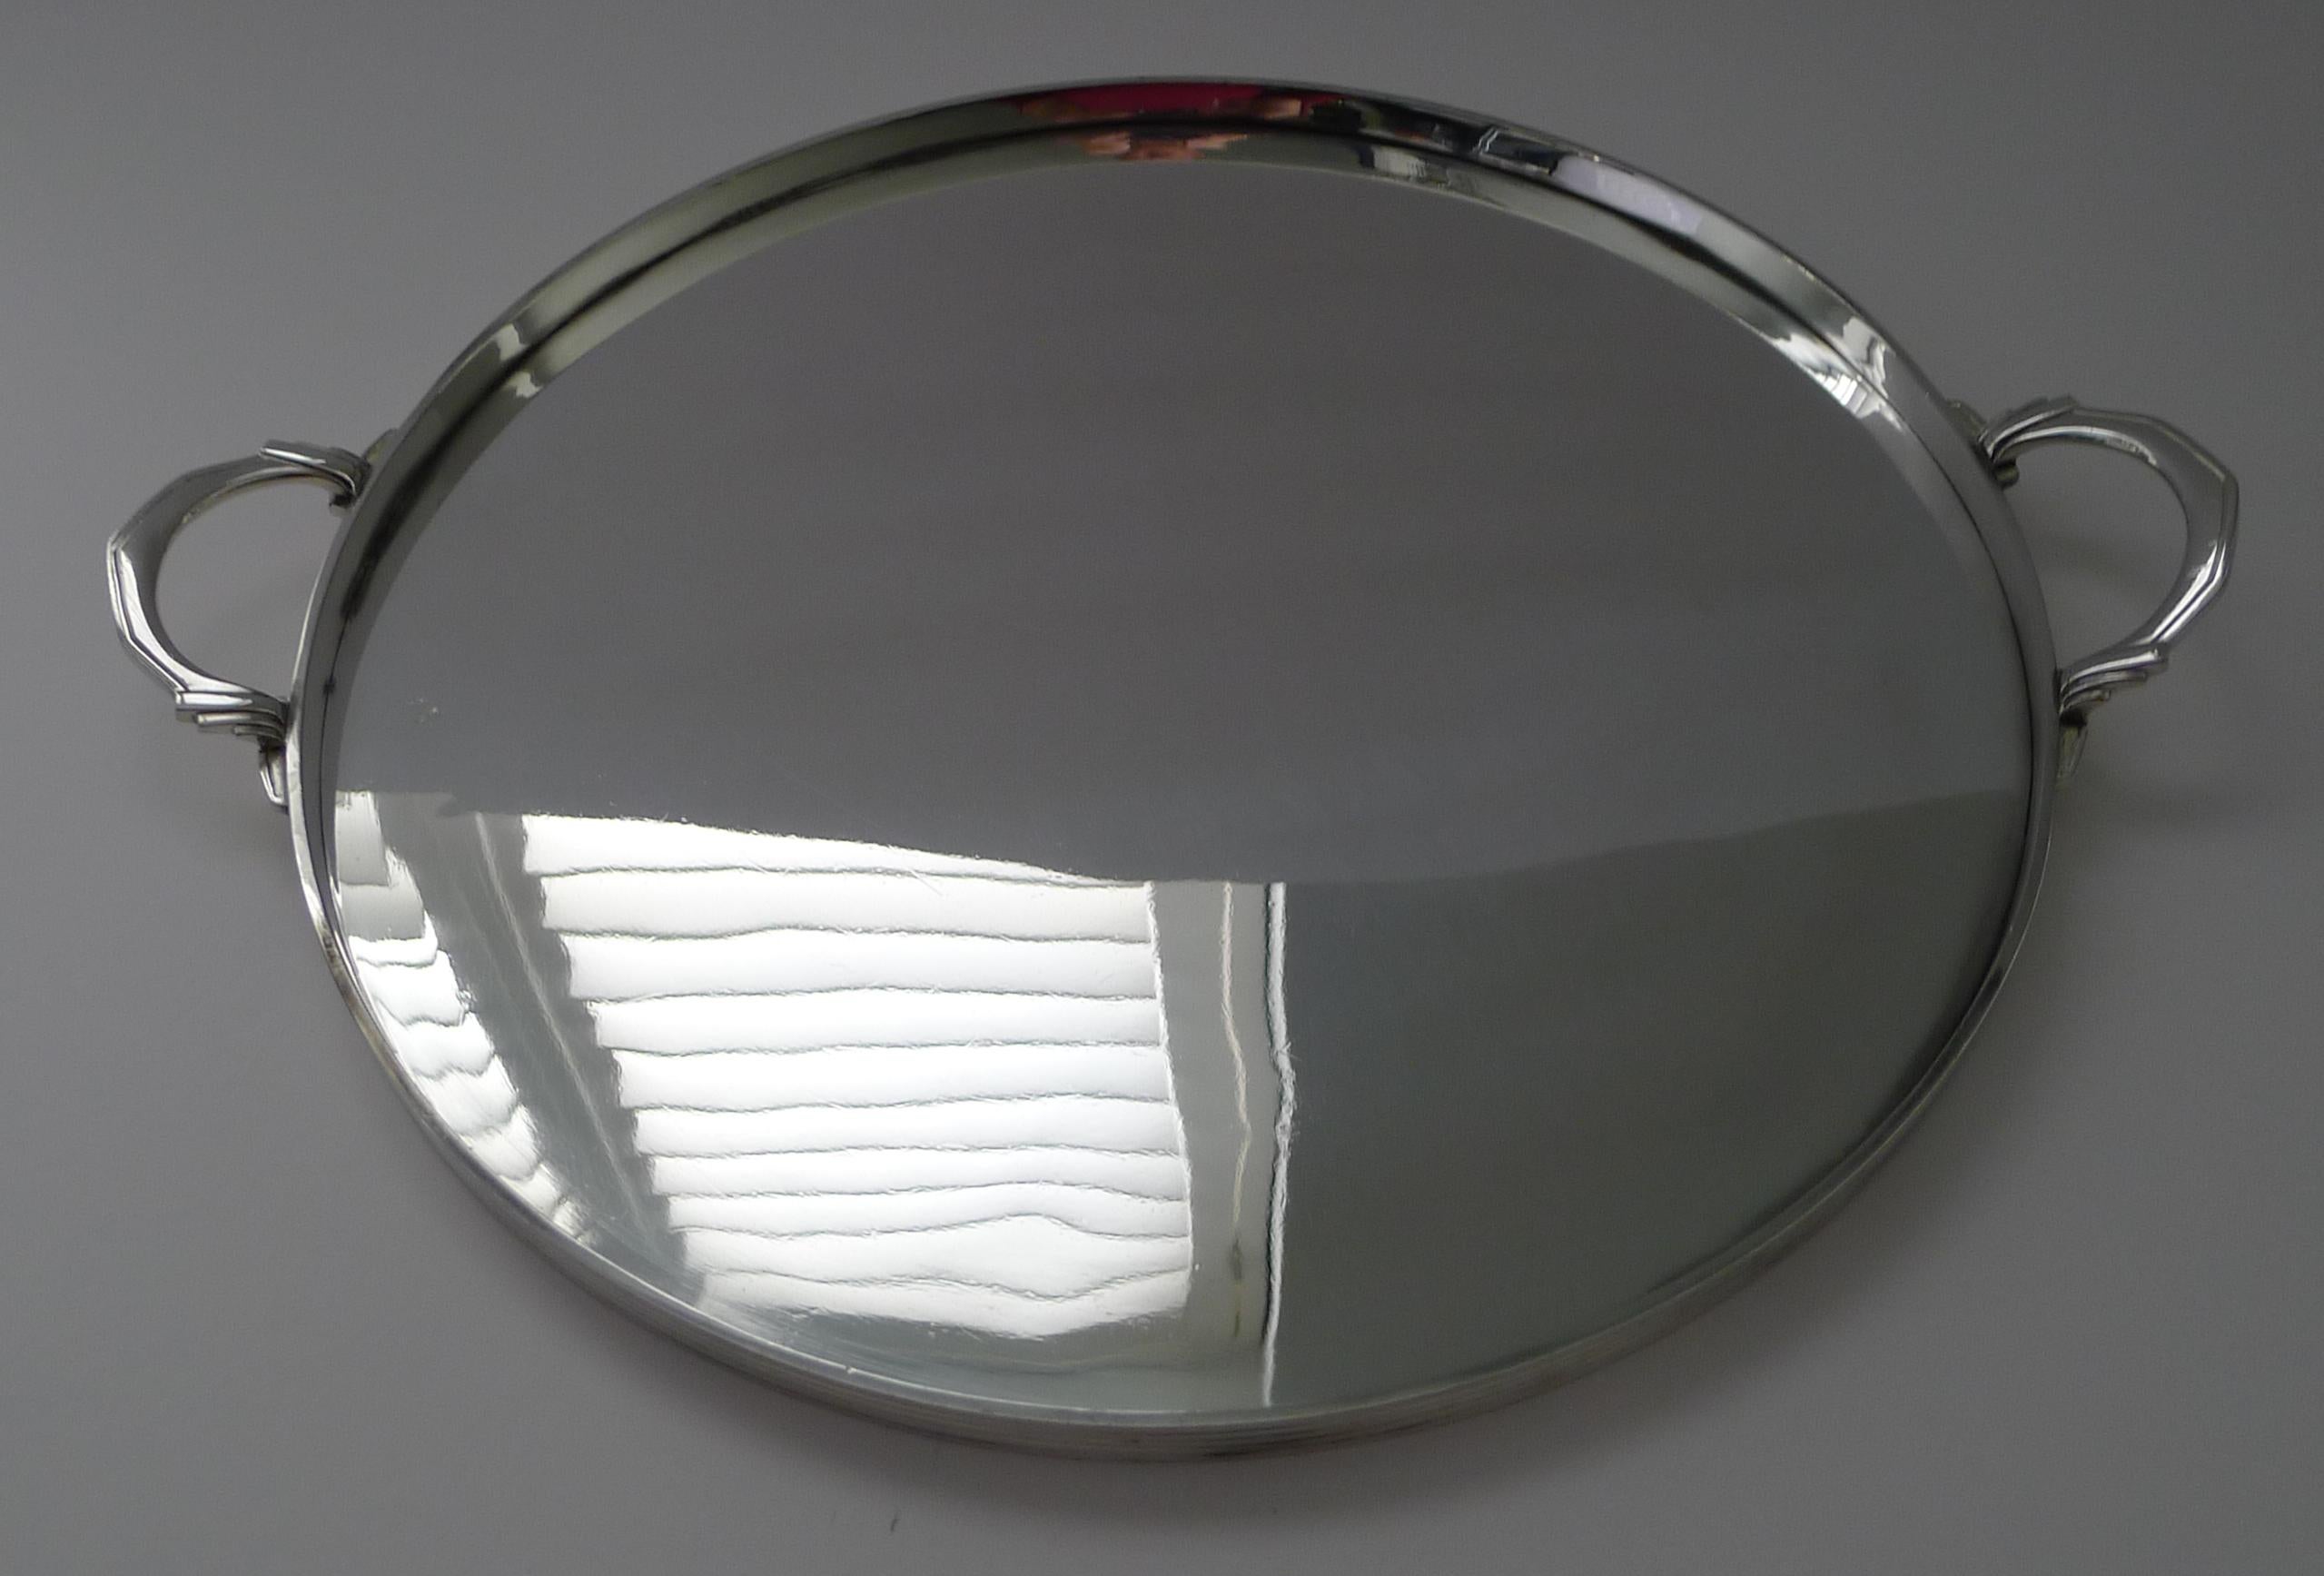 A stunning and scarcely found Art Deco handled tray, perfect of the finest bar with it's circular tray with straight sides with linear details and finished with two stylish handles.

Just back from our silversmith's, it has been professionally